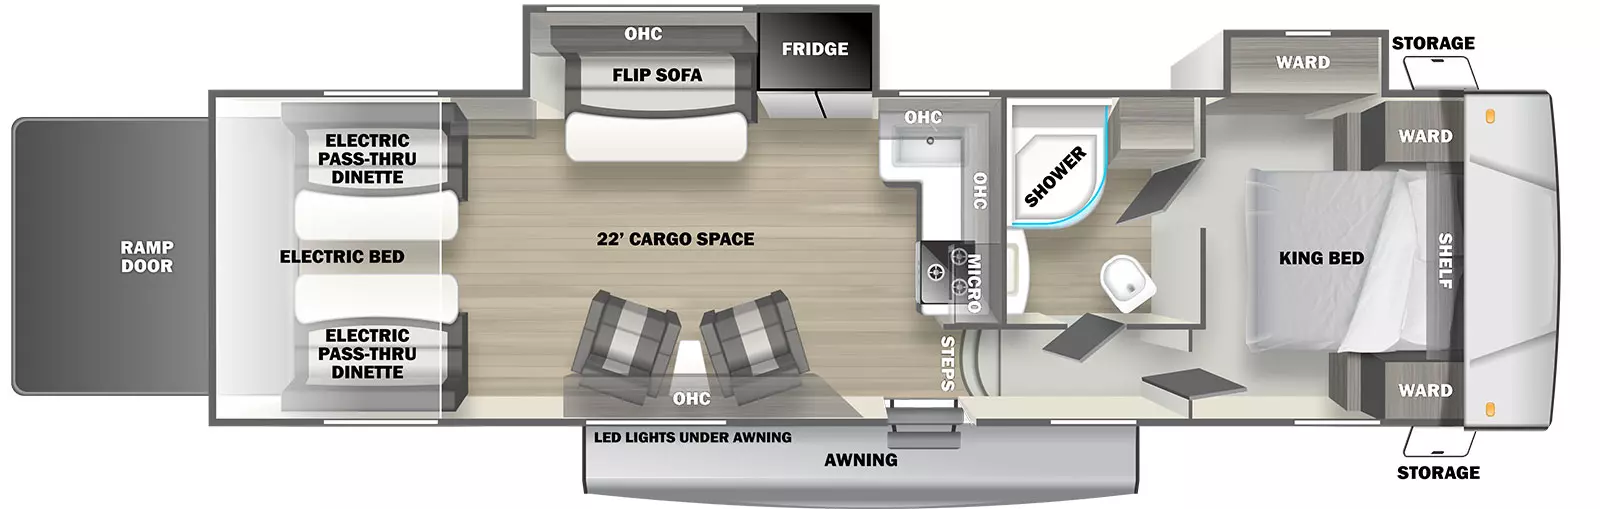 The Shockwave 34FWGDX is a toy hauler fifth wheel with one entry door, a rear ramp door, two slides on the off-door side, and 18' awning on the exterior. Inside, a walkaround king bed is located in the front of the unit, with wardrobe cabinets on either side, cabinets above the head of the bed, and a wardrobe vanity in a slideout on the off-door bedroom wall. There are two doors in the bedroom, one leading into the bathroom and one opening to a short hallway with steps leading into the main living area. The bathroom contains a sink, medicine cabinet, commode, linen cabinet, and radius glass shower. The kitchen area is located on the opposite side of the bathroom wall, which faces the rear of the unit. There is an L-shaped countertop with a sink, stovetop and oven, with cabinets and a microwave oven mounted overhead. Next to the kitchen area on the off-door wall is a slideout containing a double door refrigerator and flip sofa with half dinette table and overhead cabinets. Across from the slideout on the door side are additional overhead cabinets and a pair of upholstered chairs with small table between them. In the rear of the unit are two flip sofa benches, one on either side, with a split dinette table between them. These convert to a standard electric bed. This trailer provides 22' of interior cargo space.